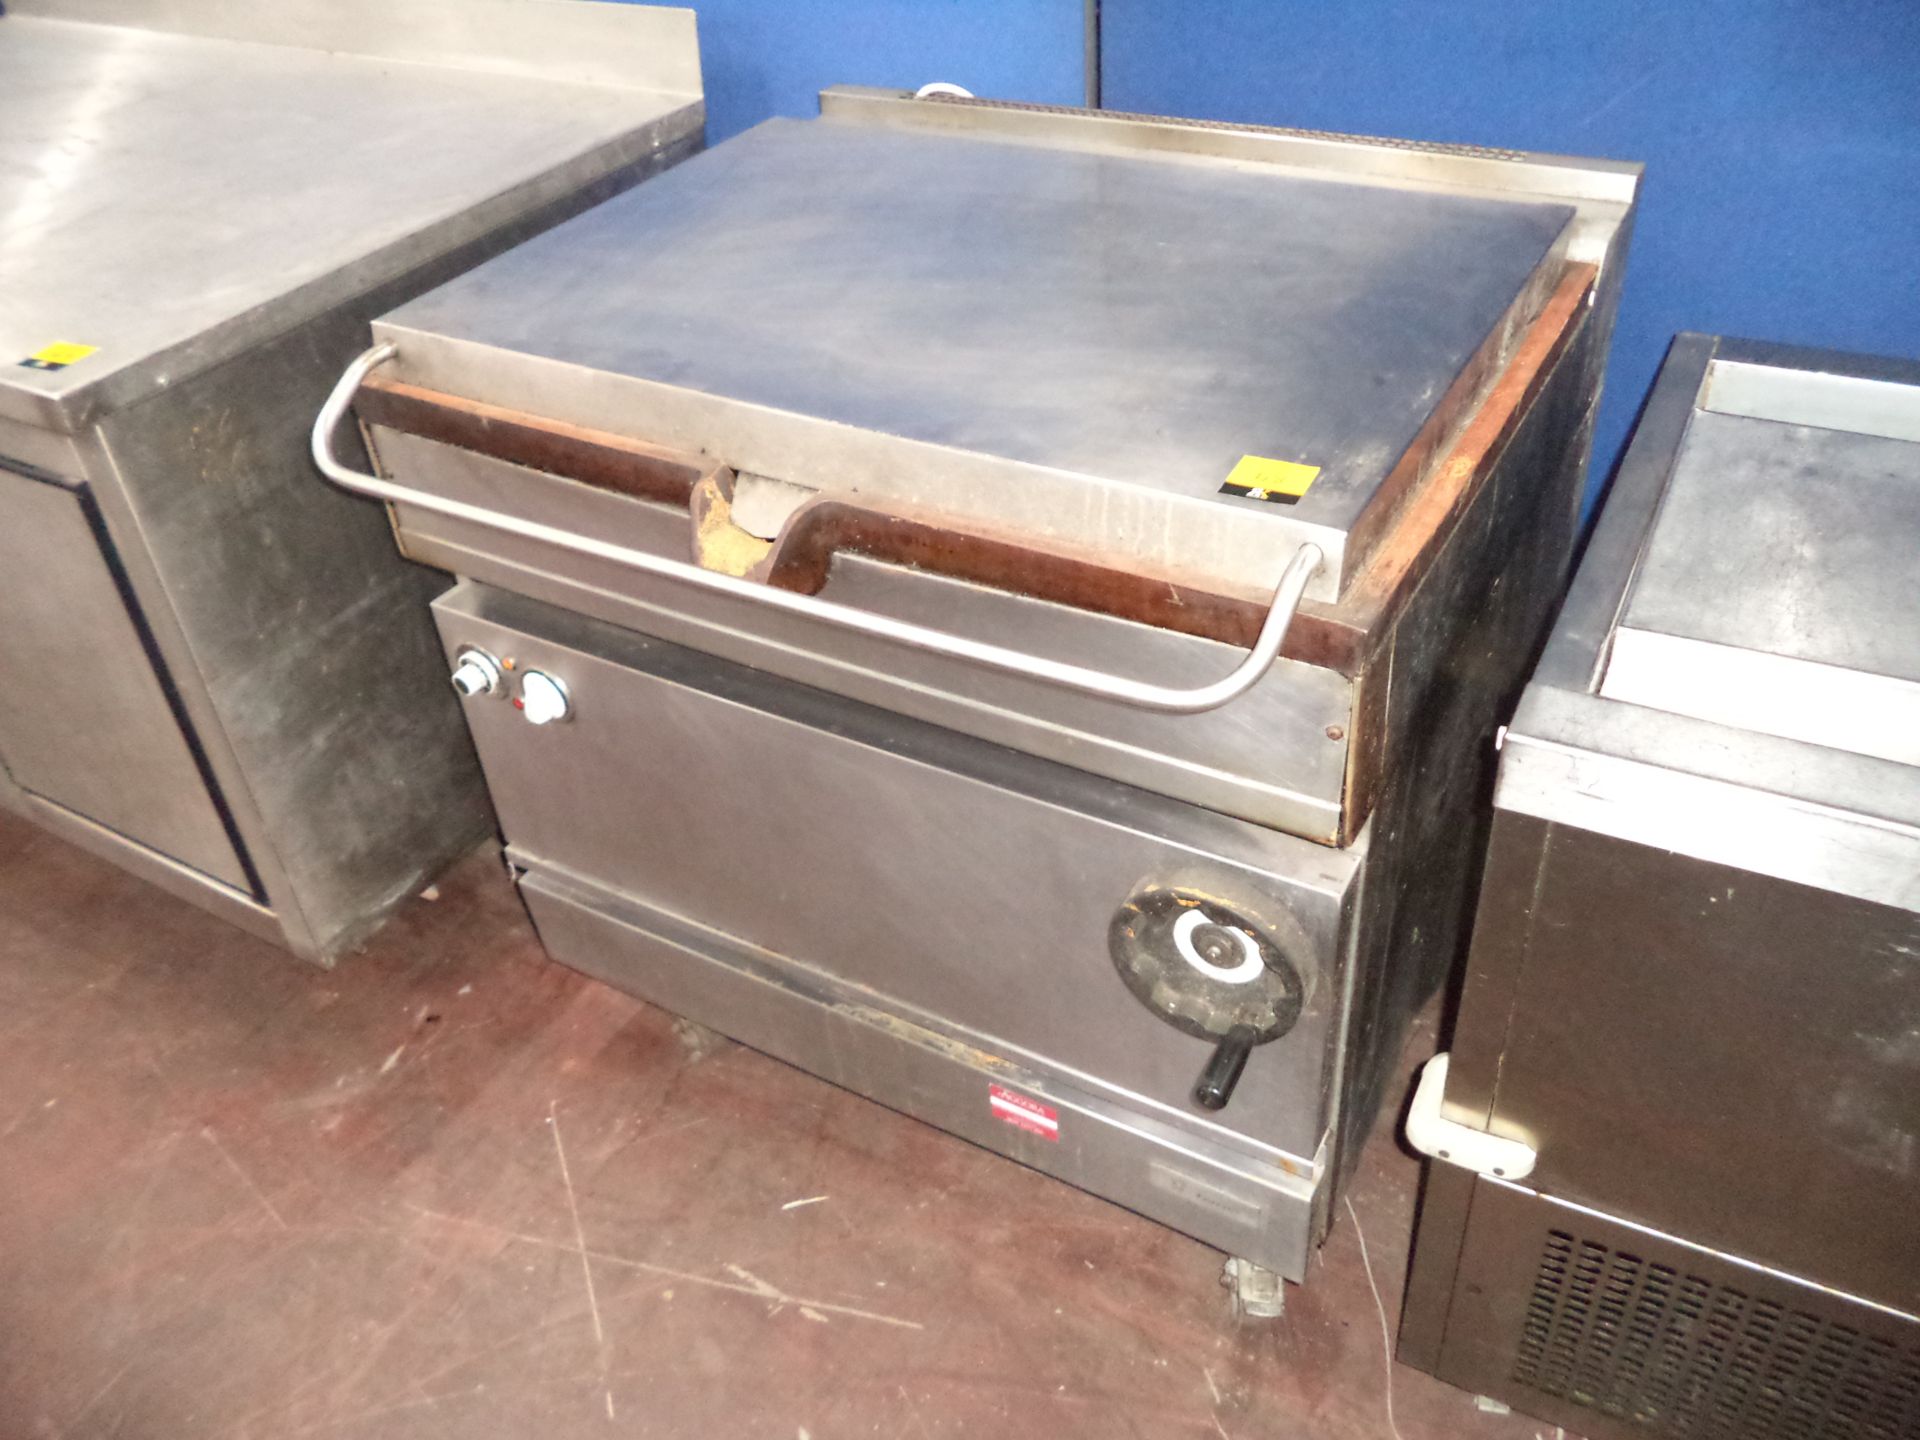 Falcon large stainless steel mobile Bratt Pan IMPORTANT: Please remember goods successfully bid upon